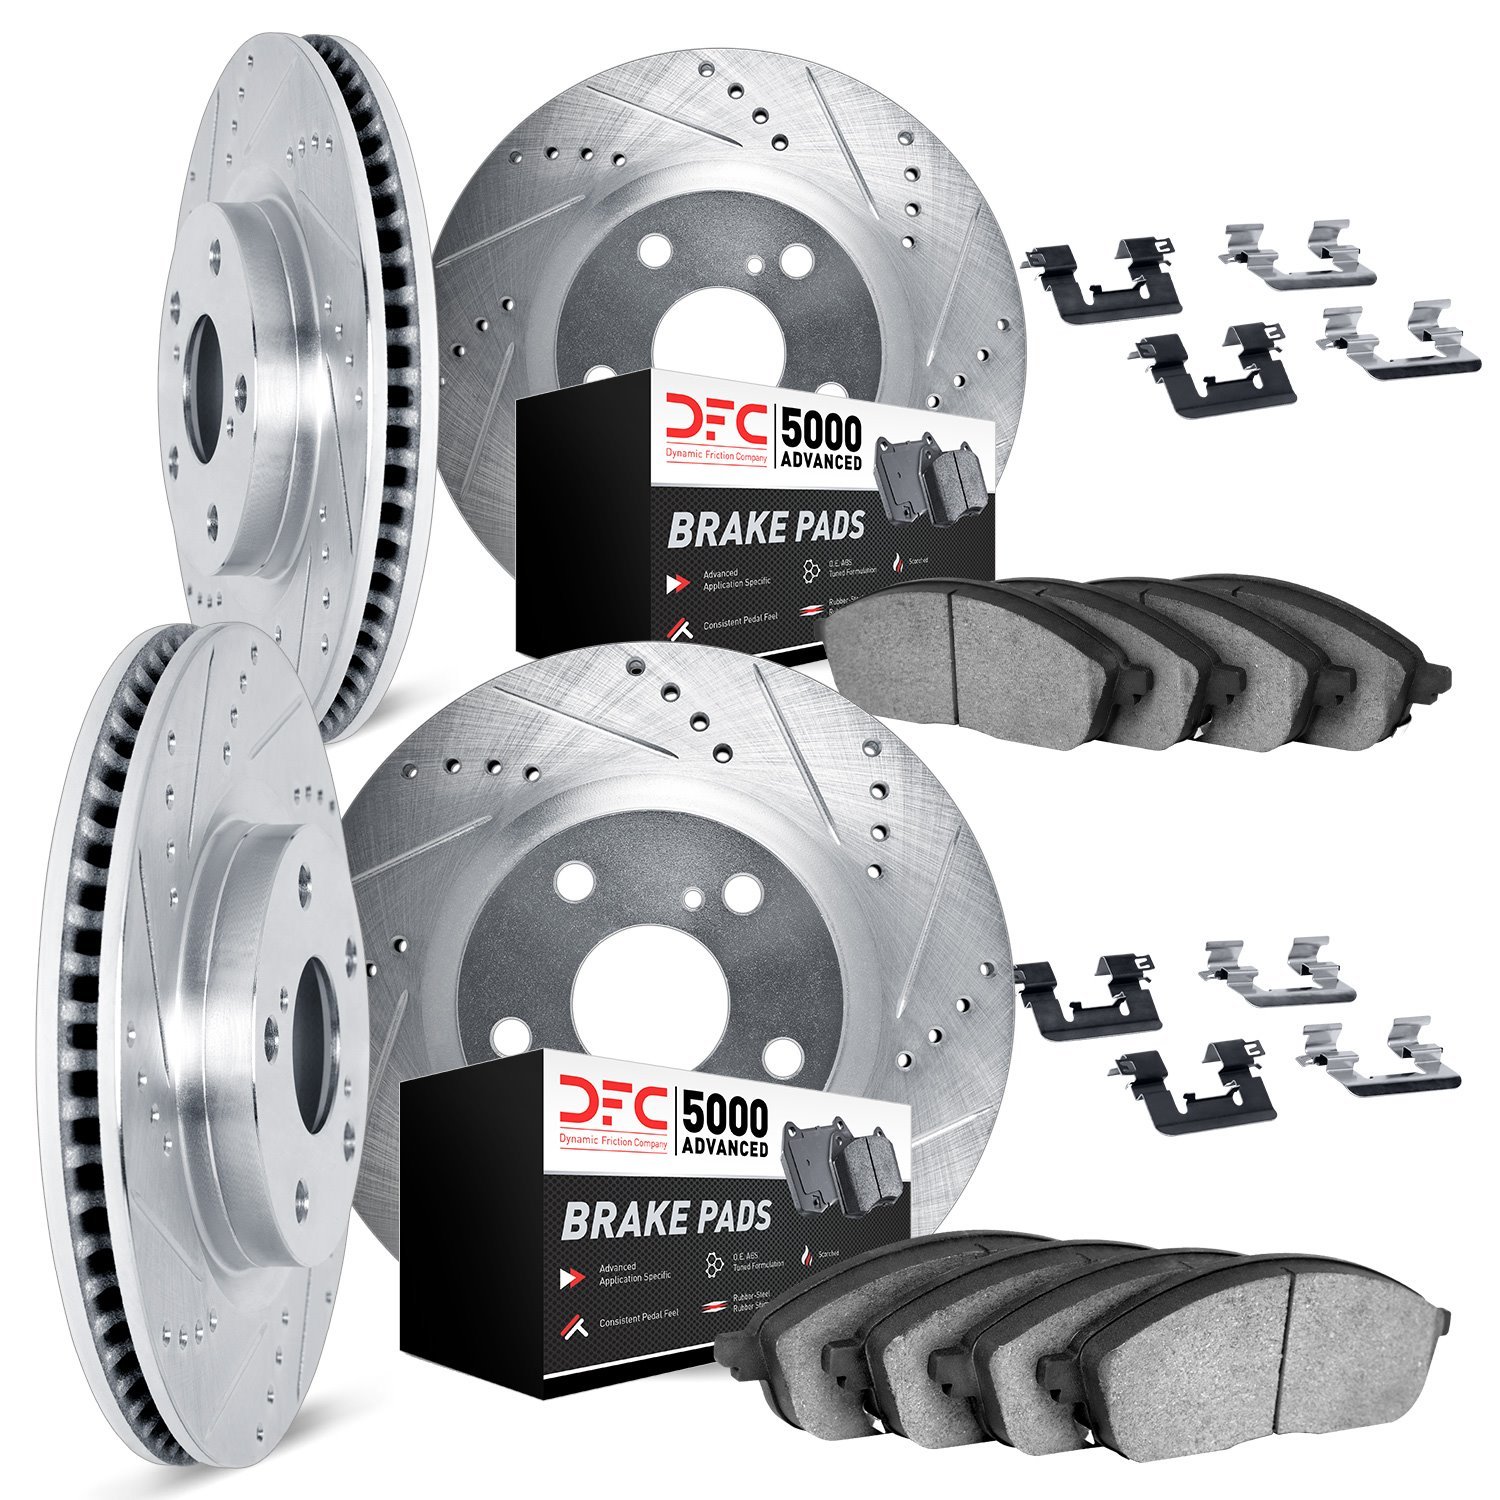 7514-13018 Drilled/Slotted Brake Rotors w/5000 Advanced Brake Pads Kit & Hardware [Silver], Fits Select Subaru, Position: Front